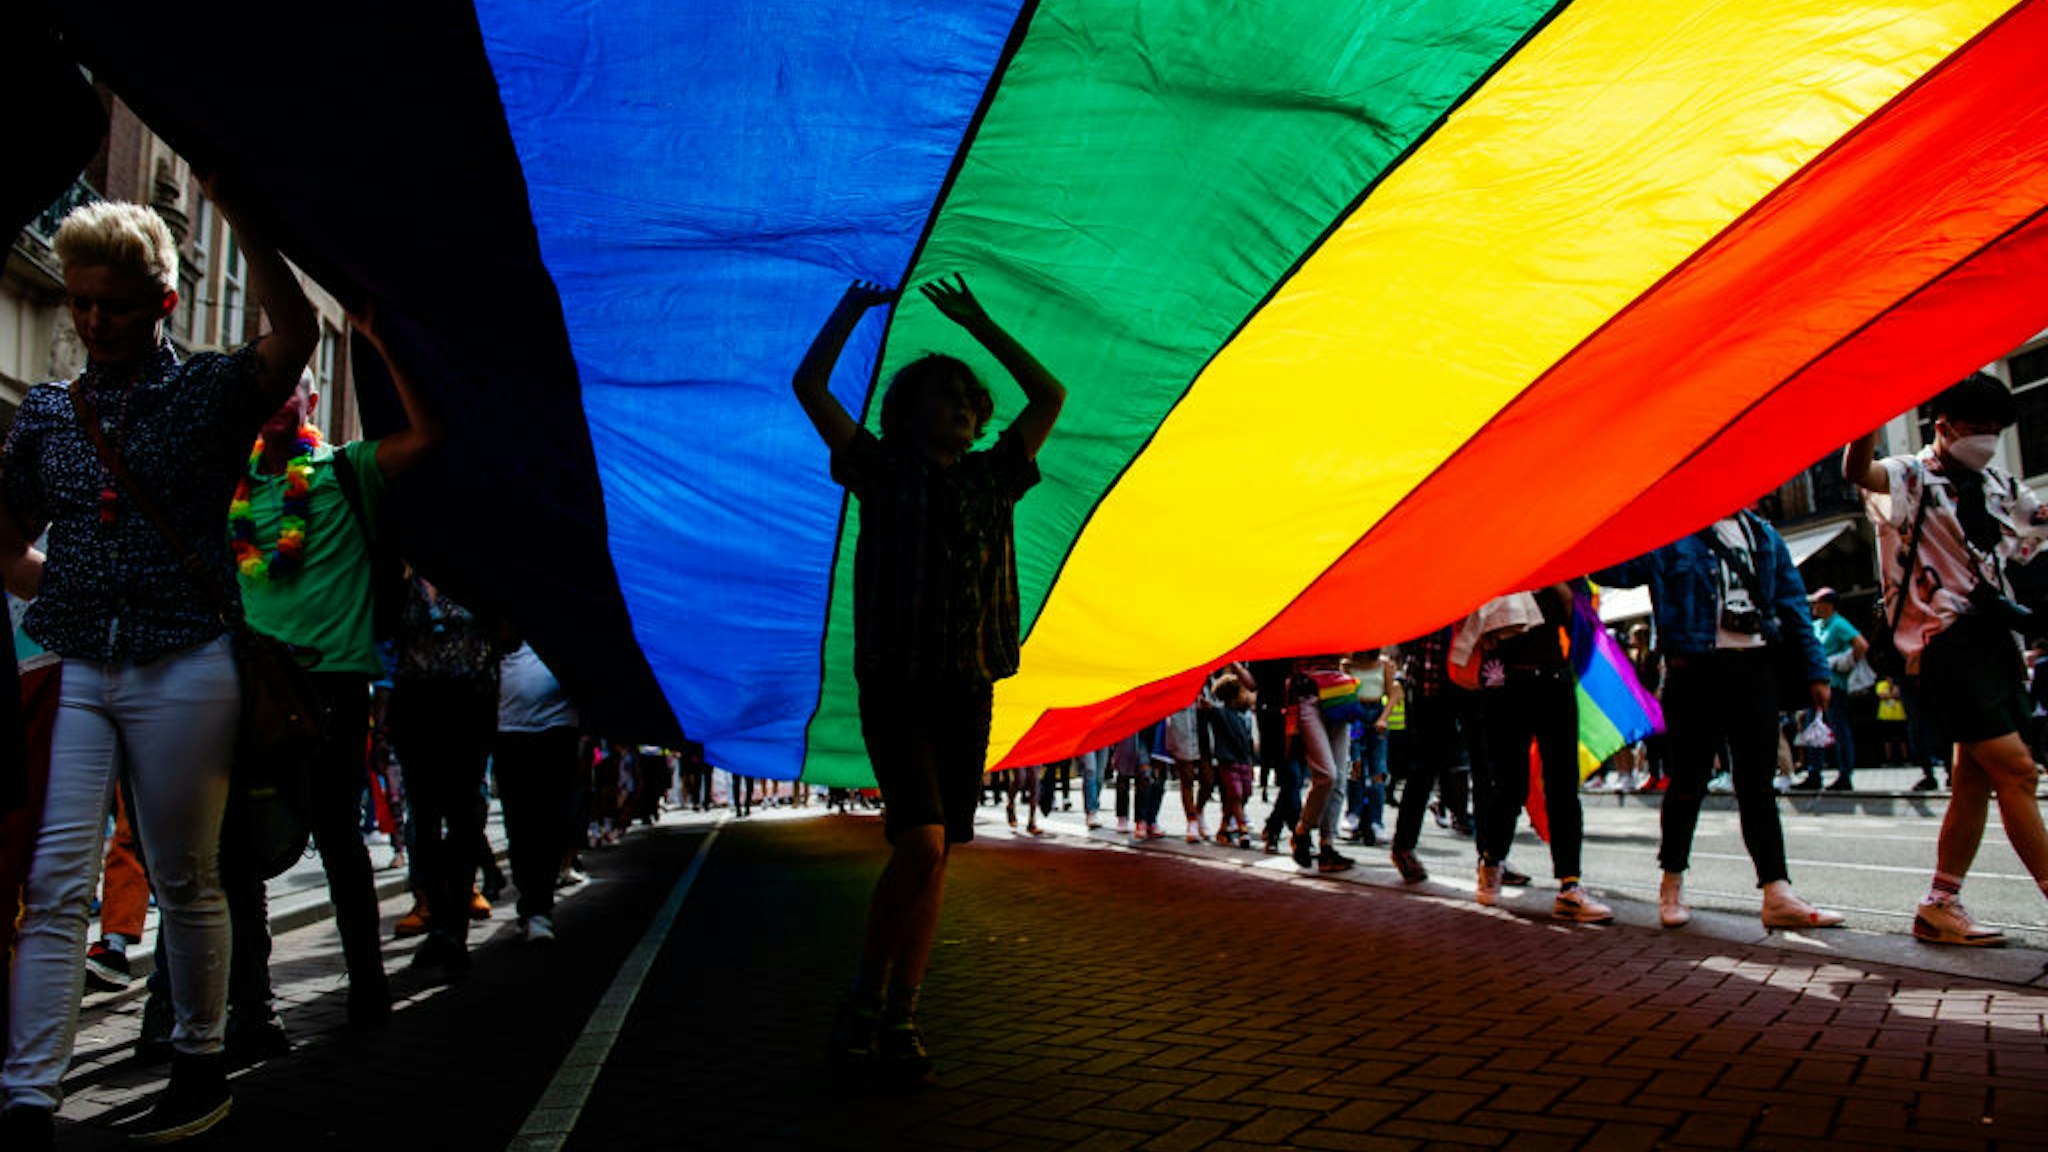 A boy is dancing under the big rainbow flag, during the celebration of the Pride walk in Amsterdam, on August 7th, 2021.